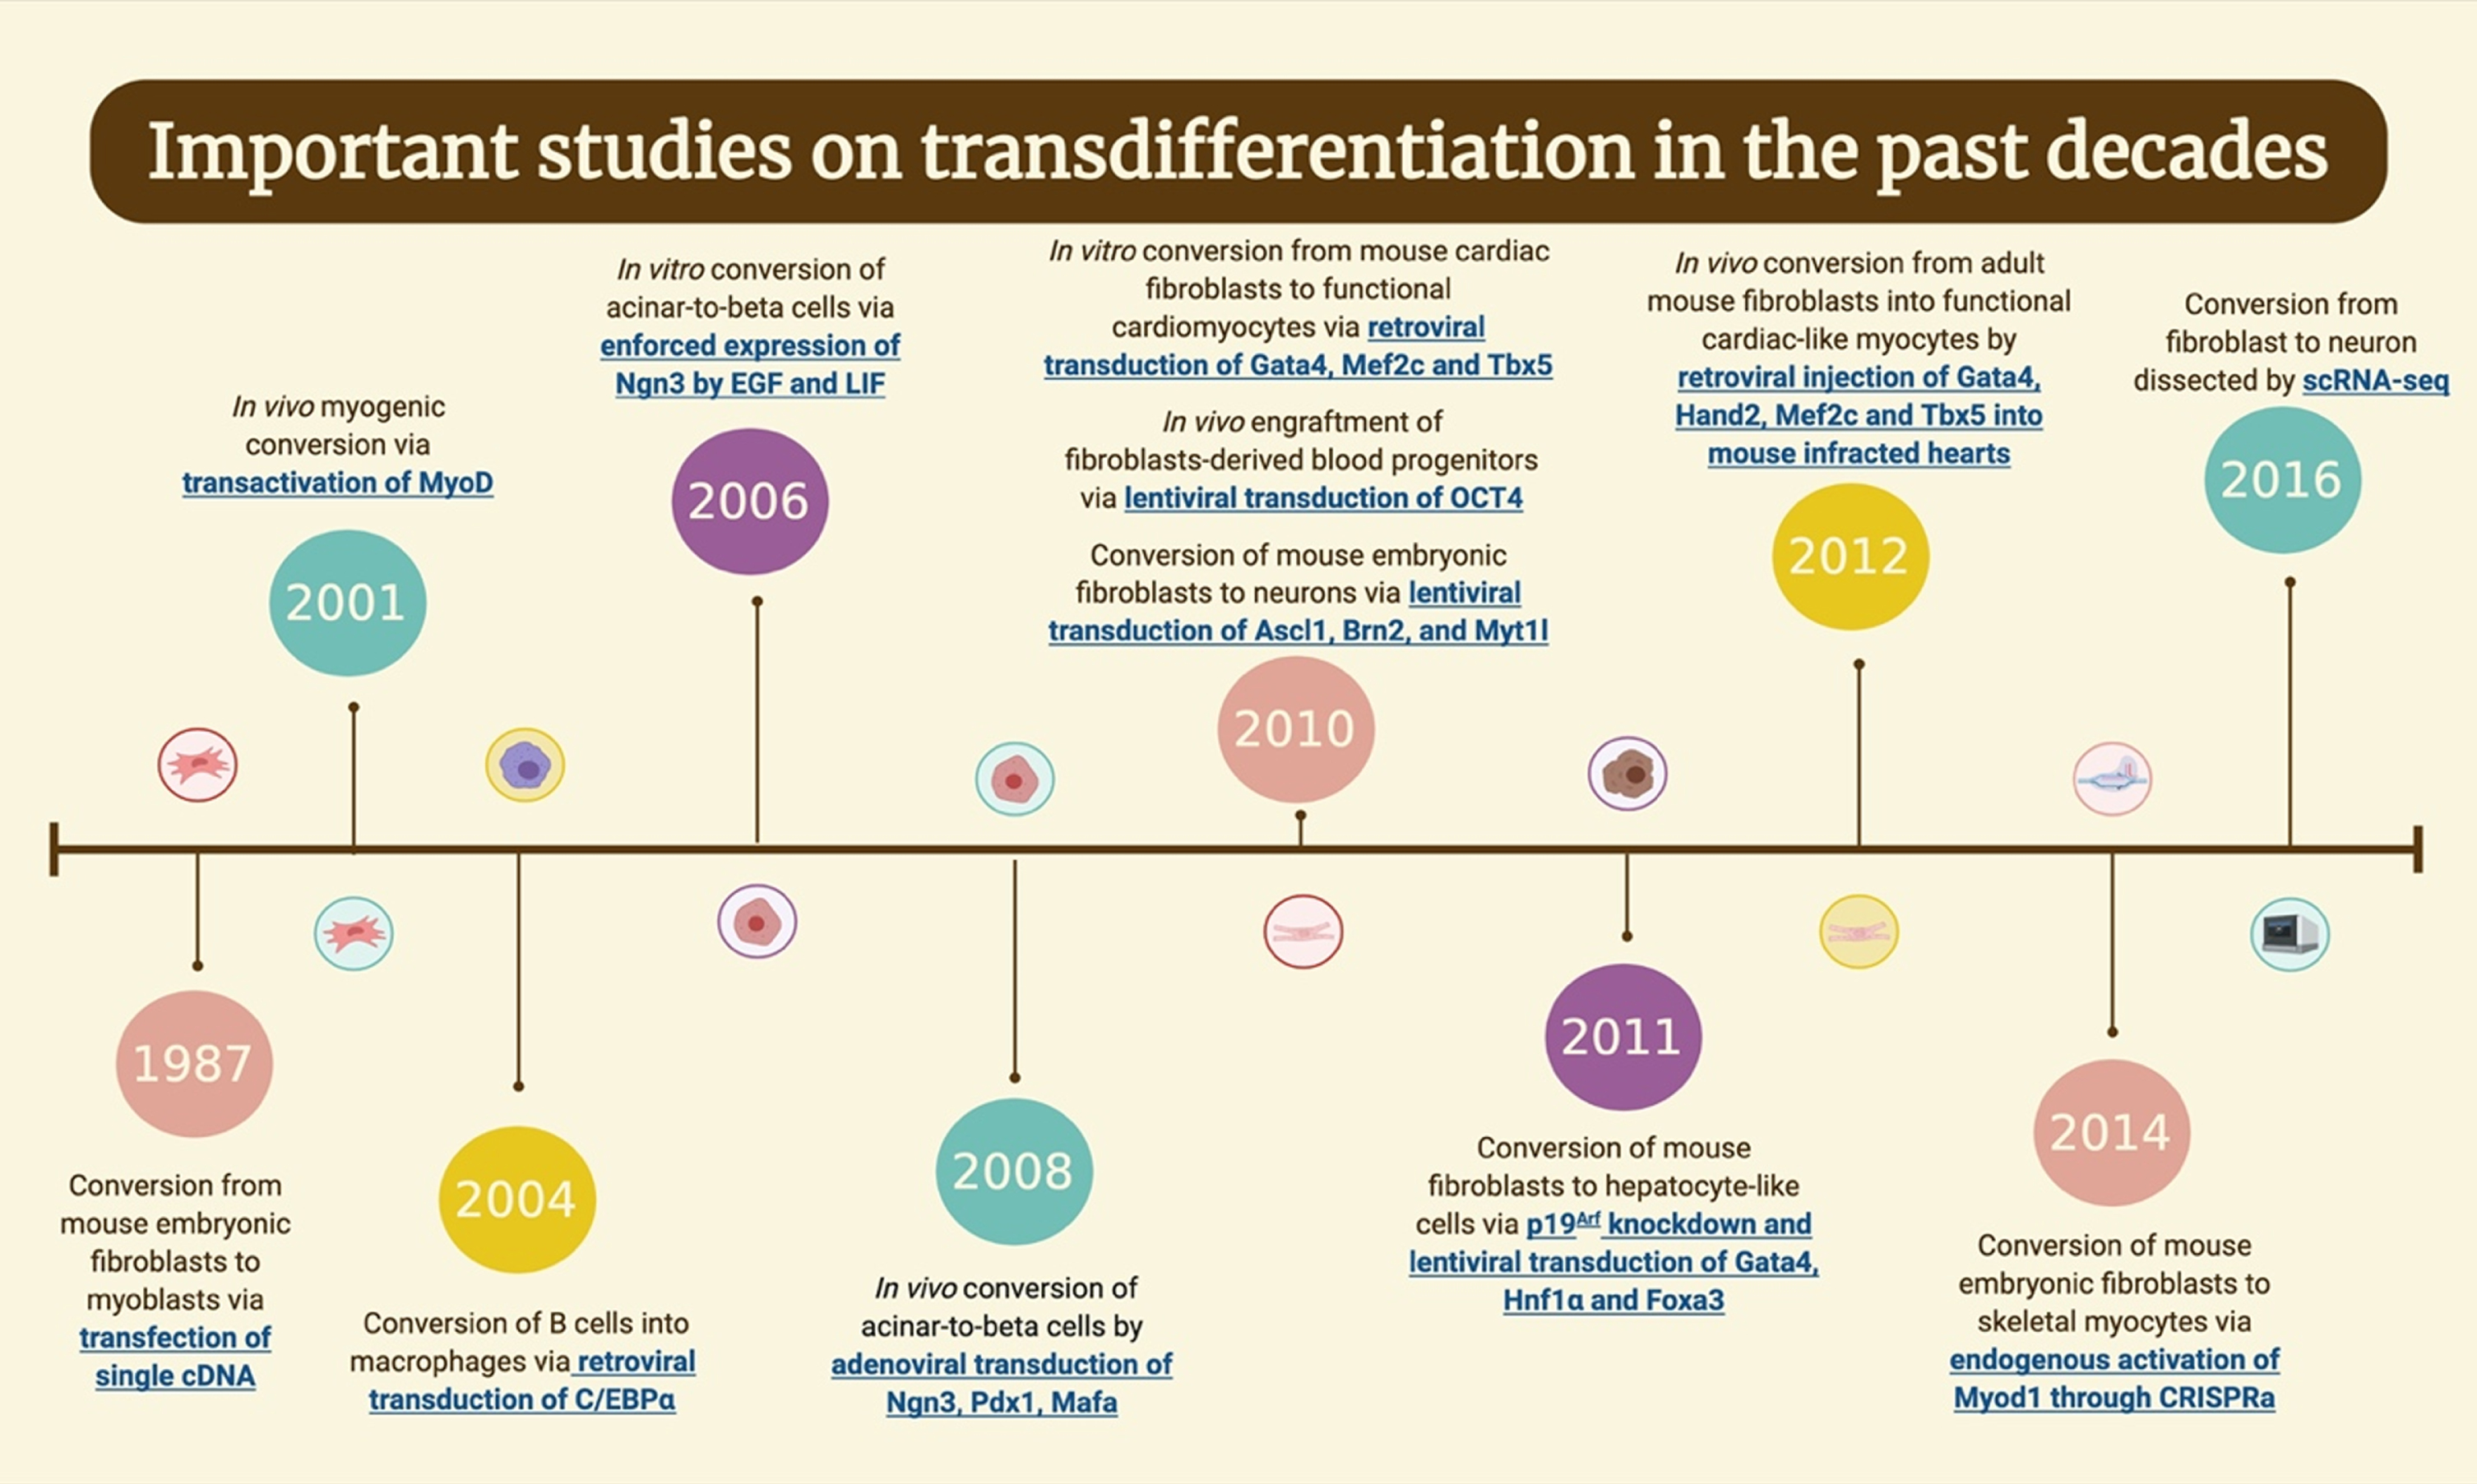 Timeline of the important works in the field of transdifferentiation the past decades. Figure is created with BioRender.com.